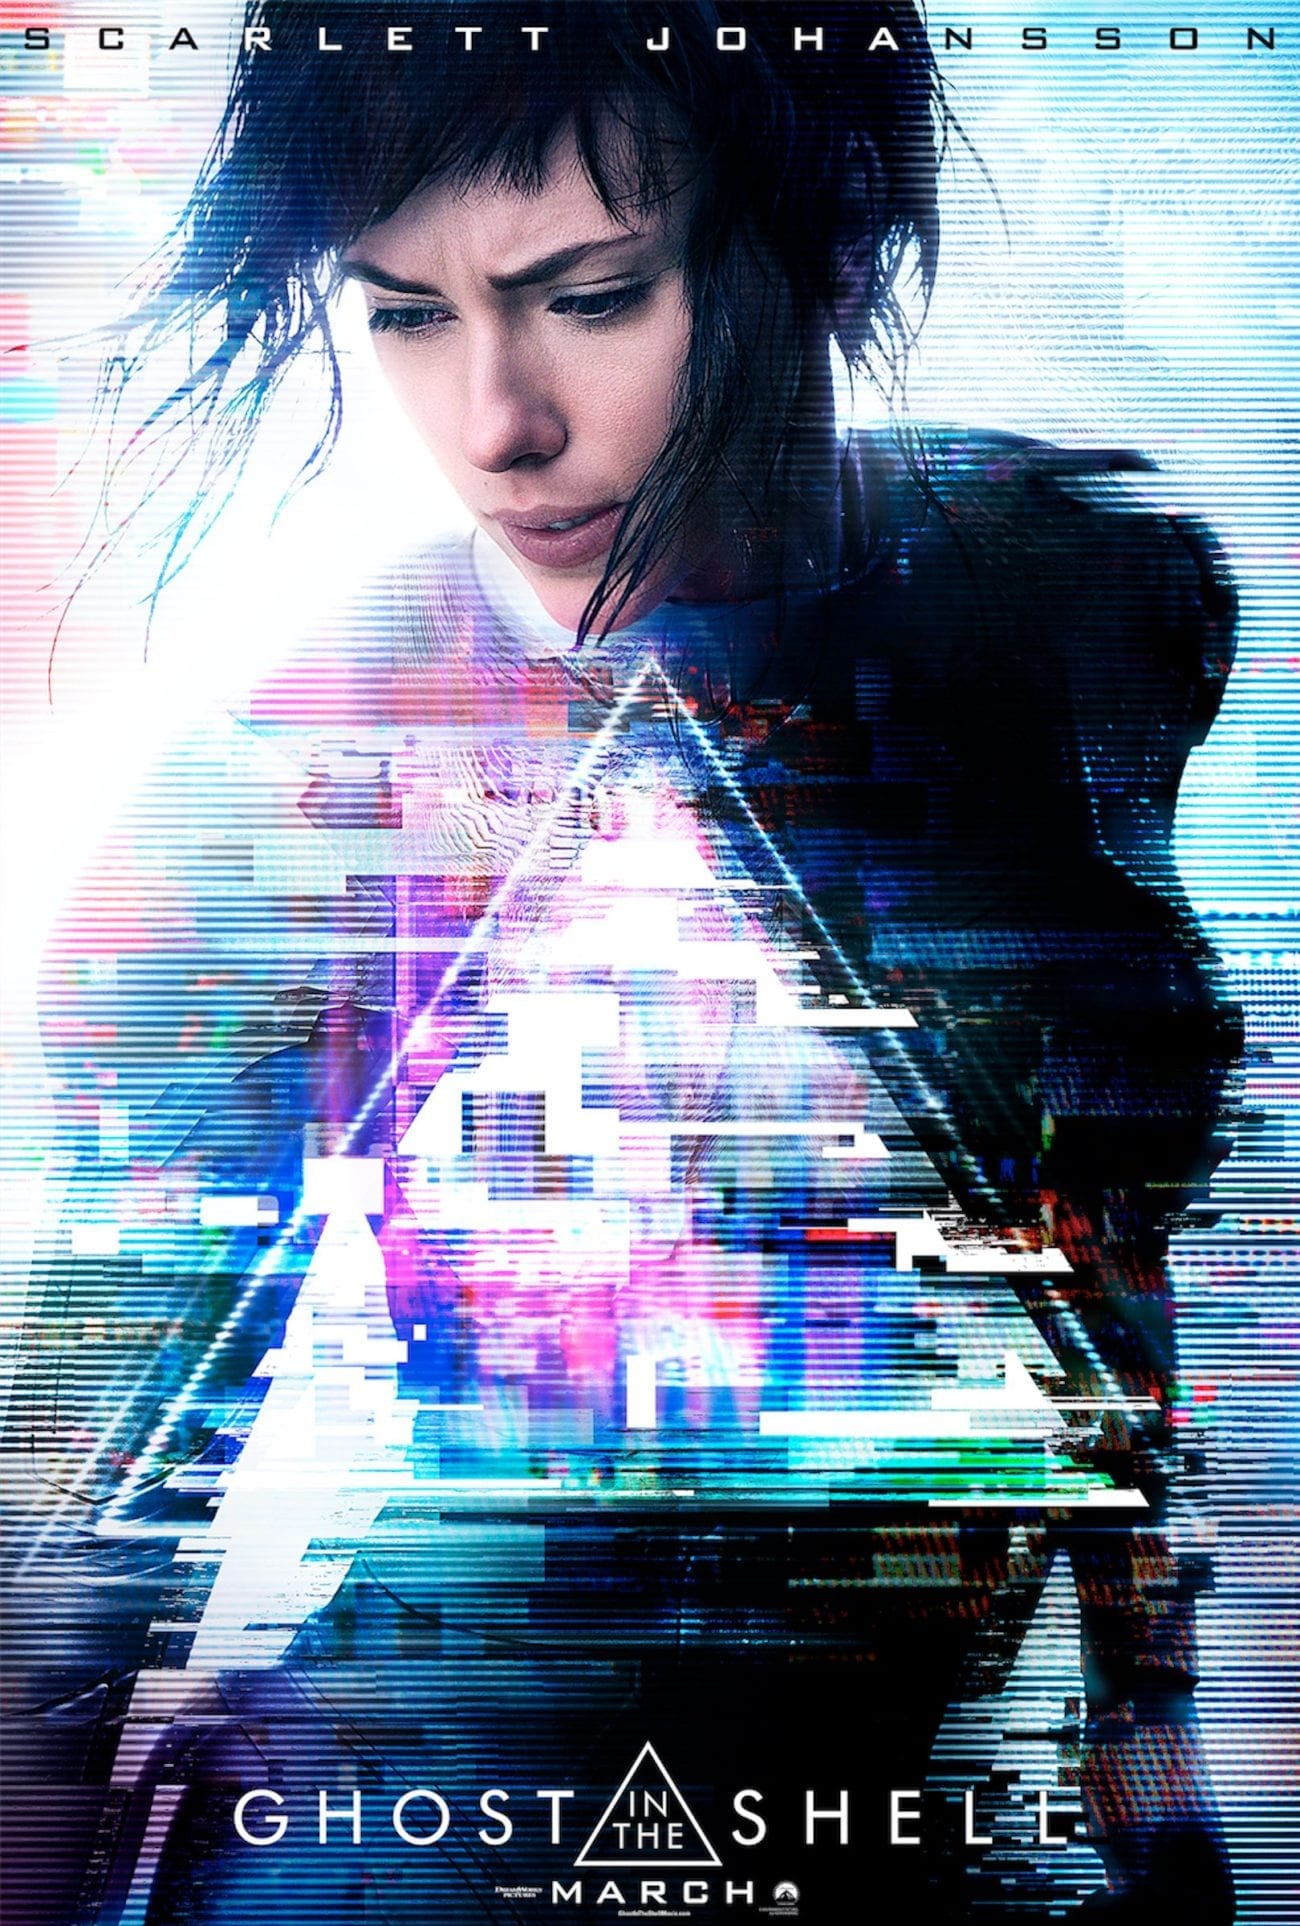 Our Film Daily team rounds up our picks of outside-the-box cinema out this weekend. Featuring 'Ghost in the Shell', 'All this Panic', and more.